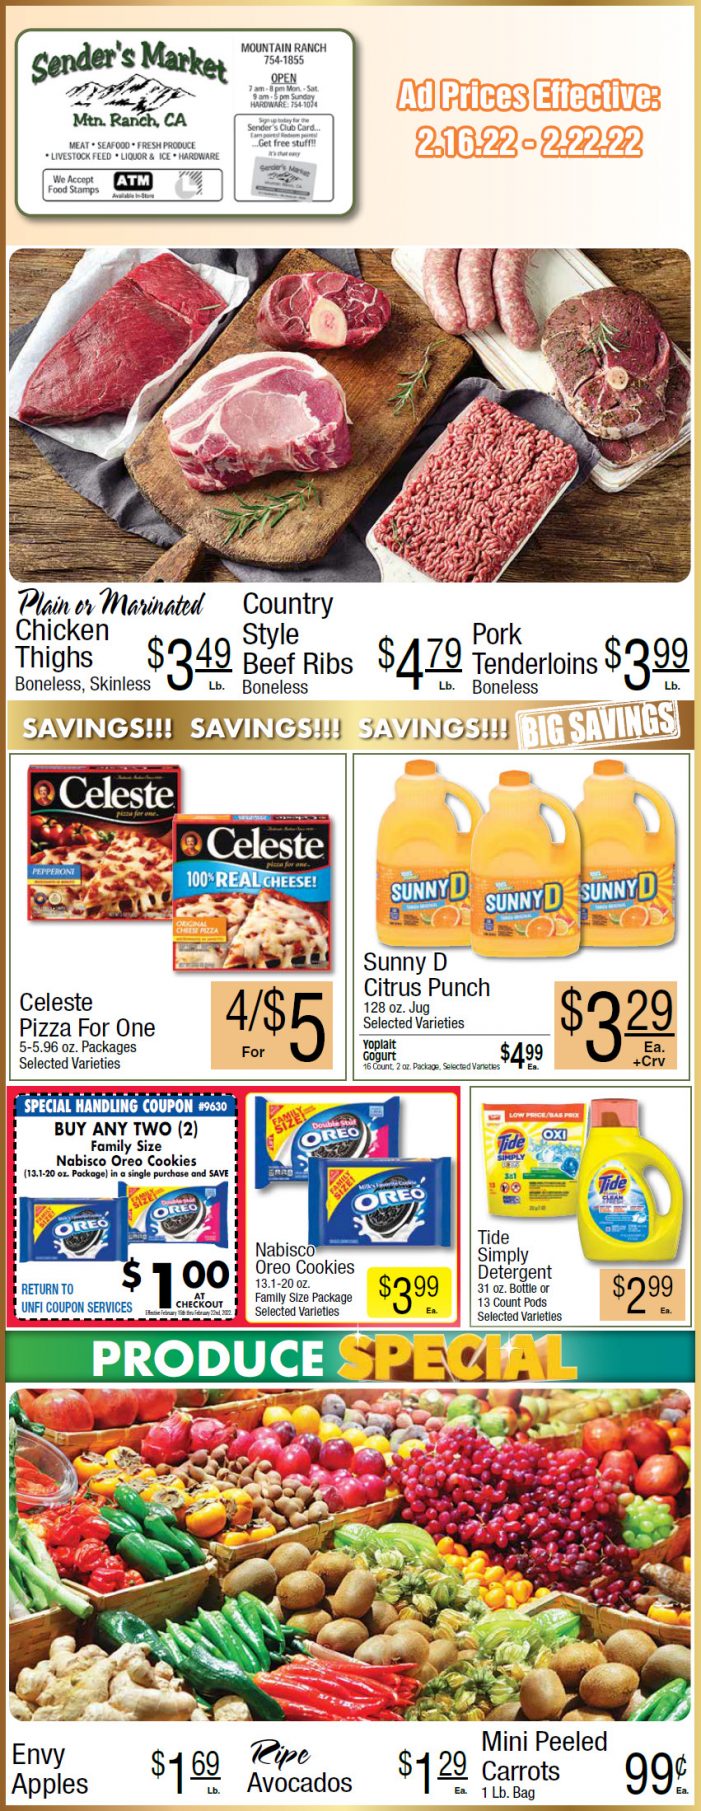 Sender’s Market’s Weekly Ad & Grocery Specials February 16th ~ 22nd! Shop Local & Save!